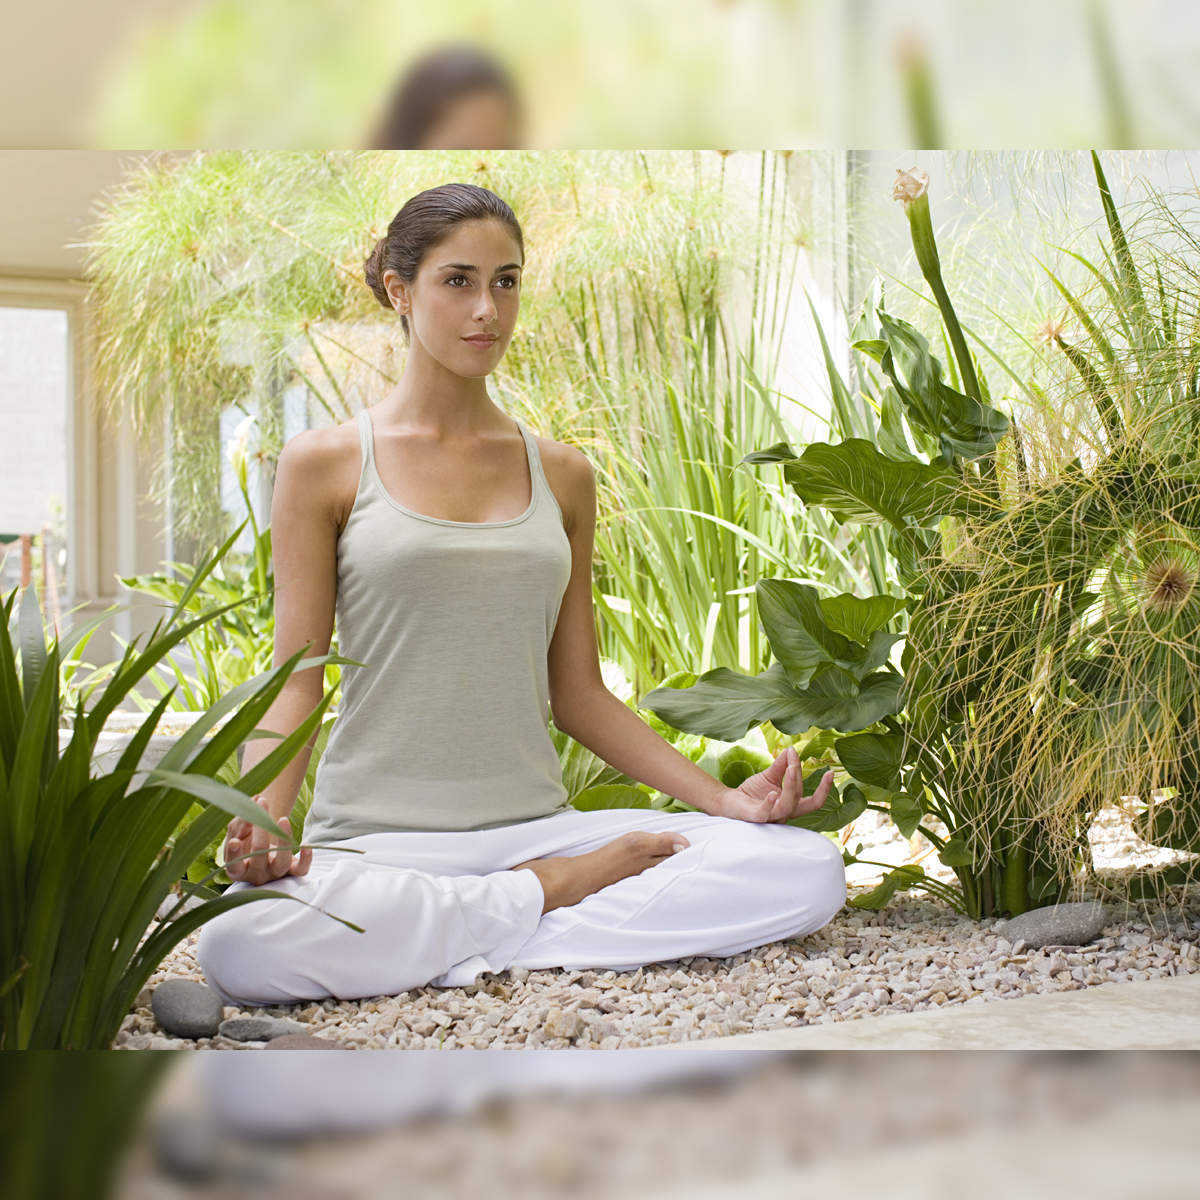 Reduce Stress With These Yoga Asanas - Healthy Lifestyle